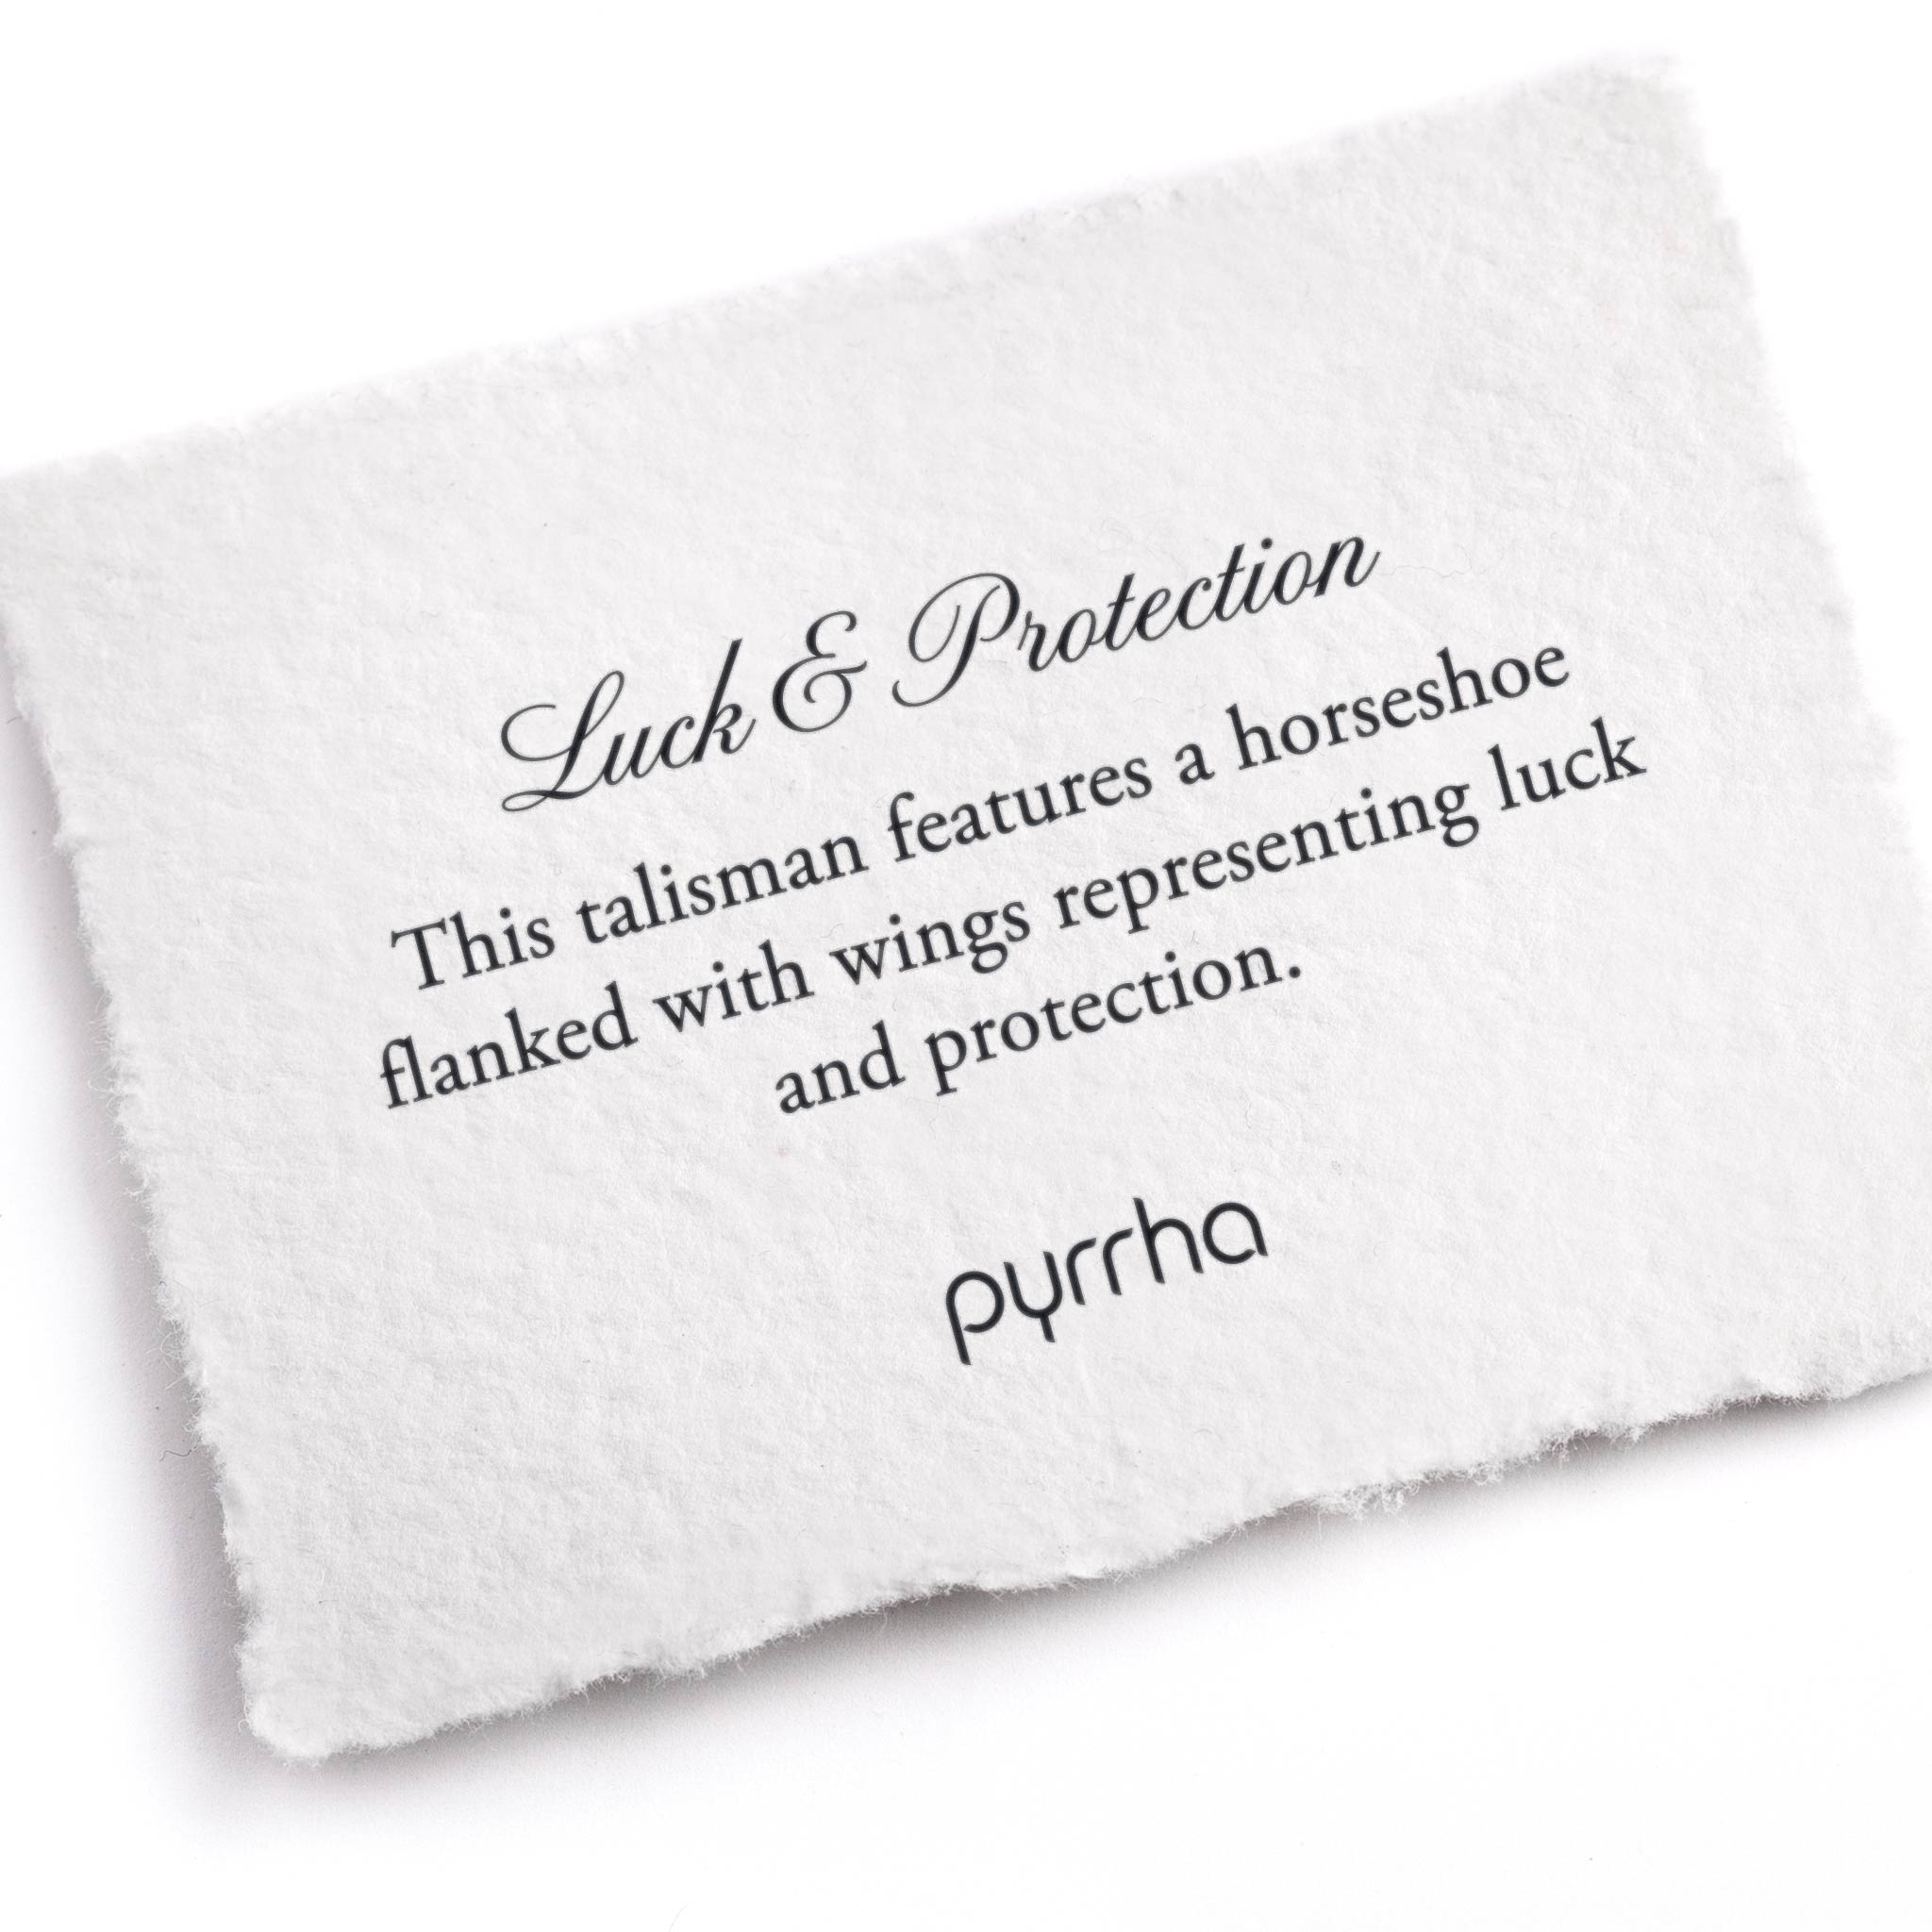 A hand-torn, letterpress printed card describing the meaning for Pyrrha's Luck & Protection Talisman